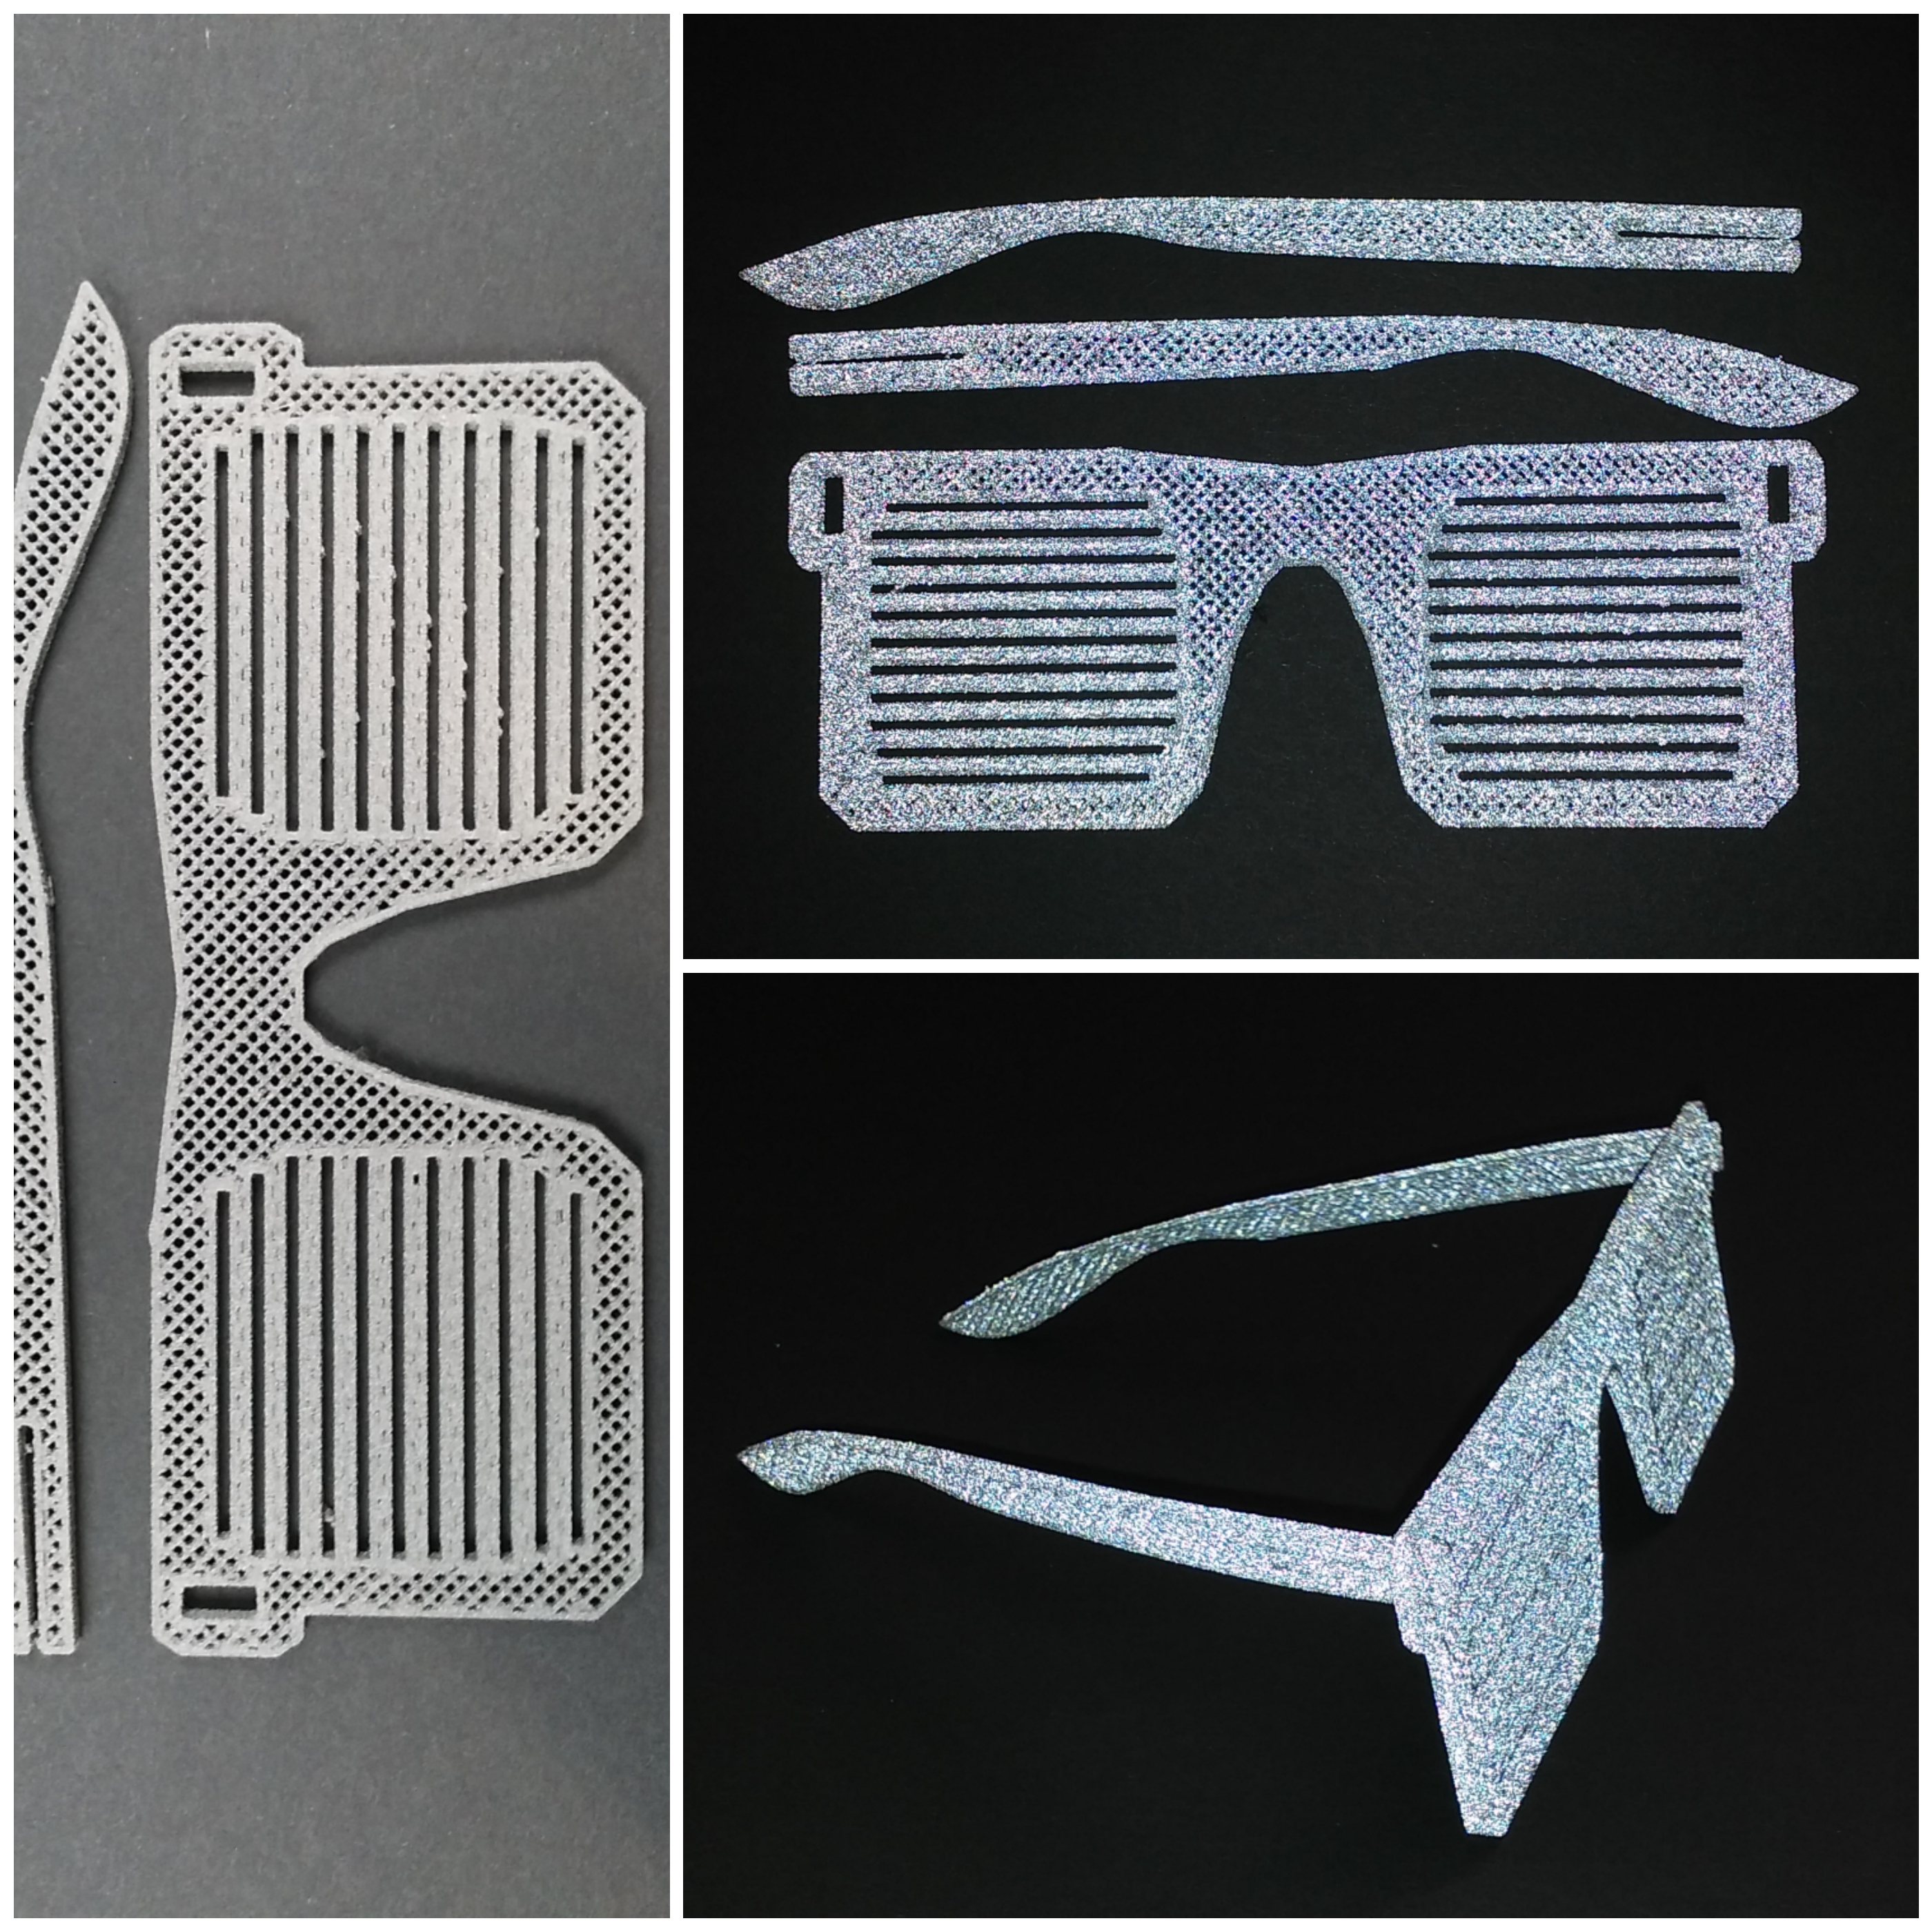 3D printed reflect-o-lay glasses by kai parthy